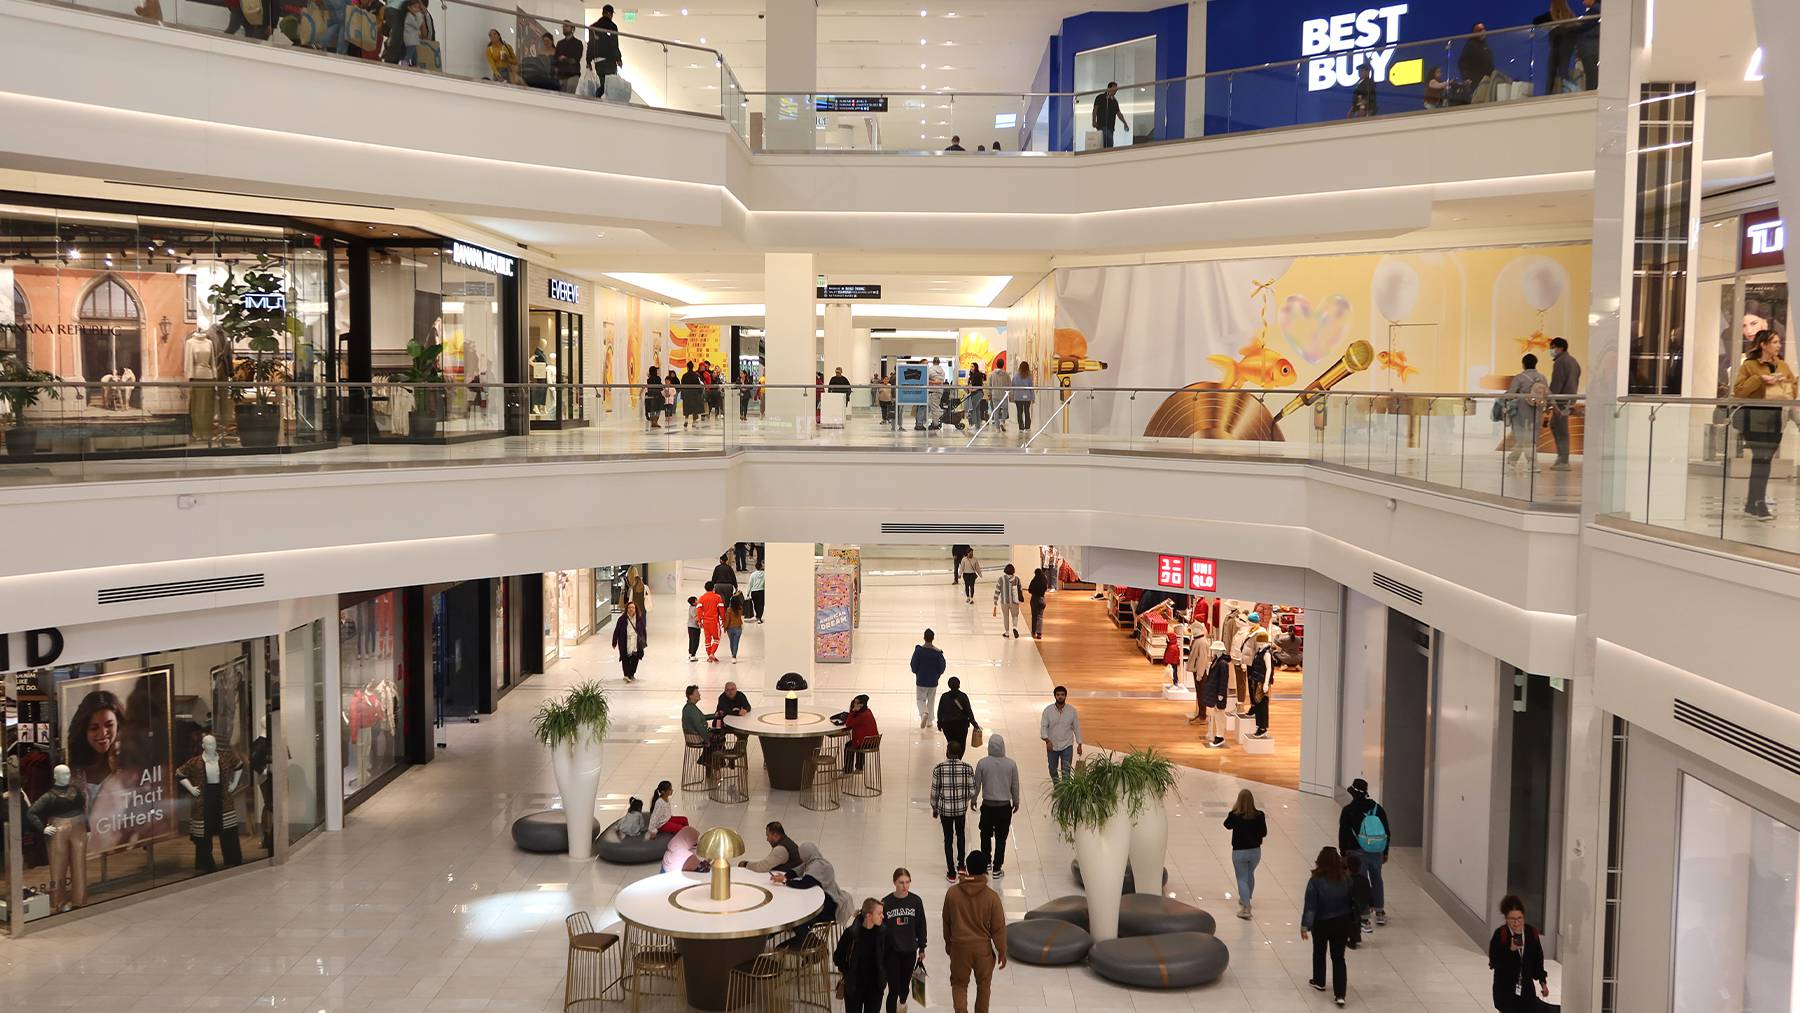 A shopping mall showing a multi-level interior of stores.